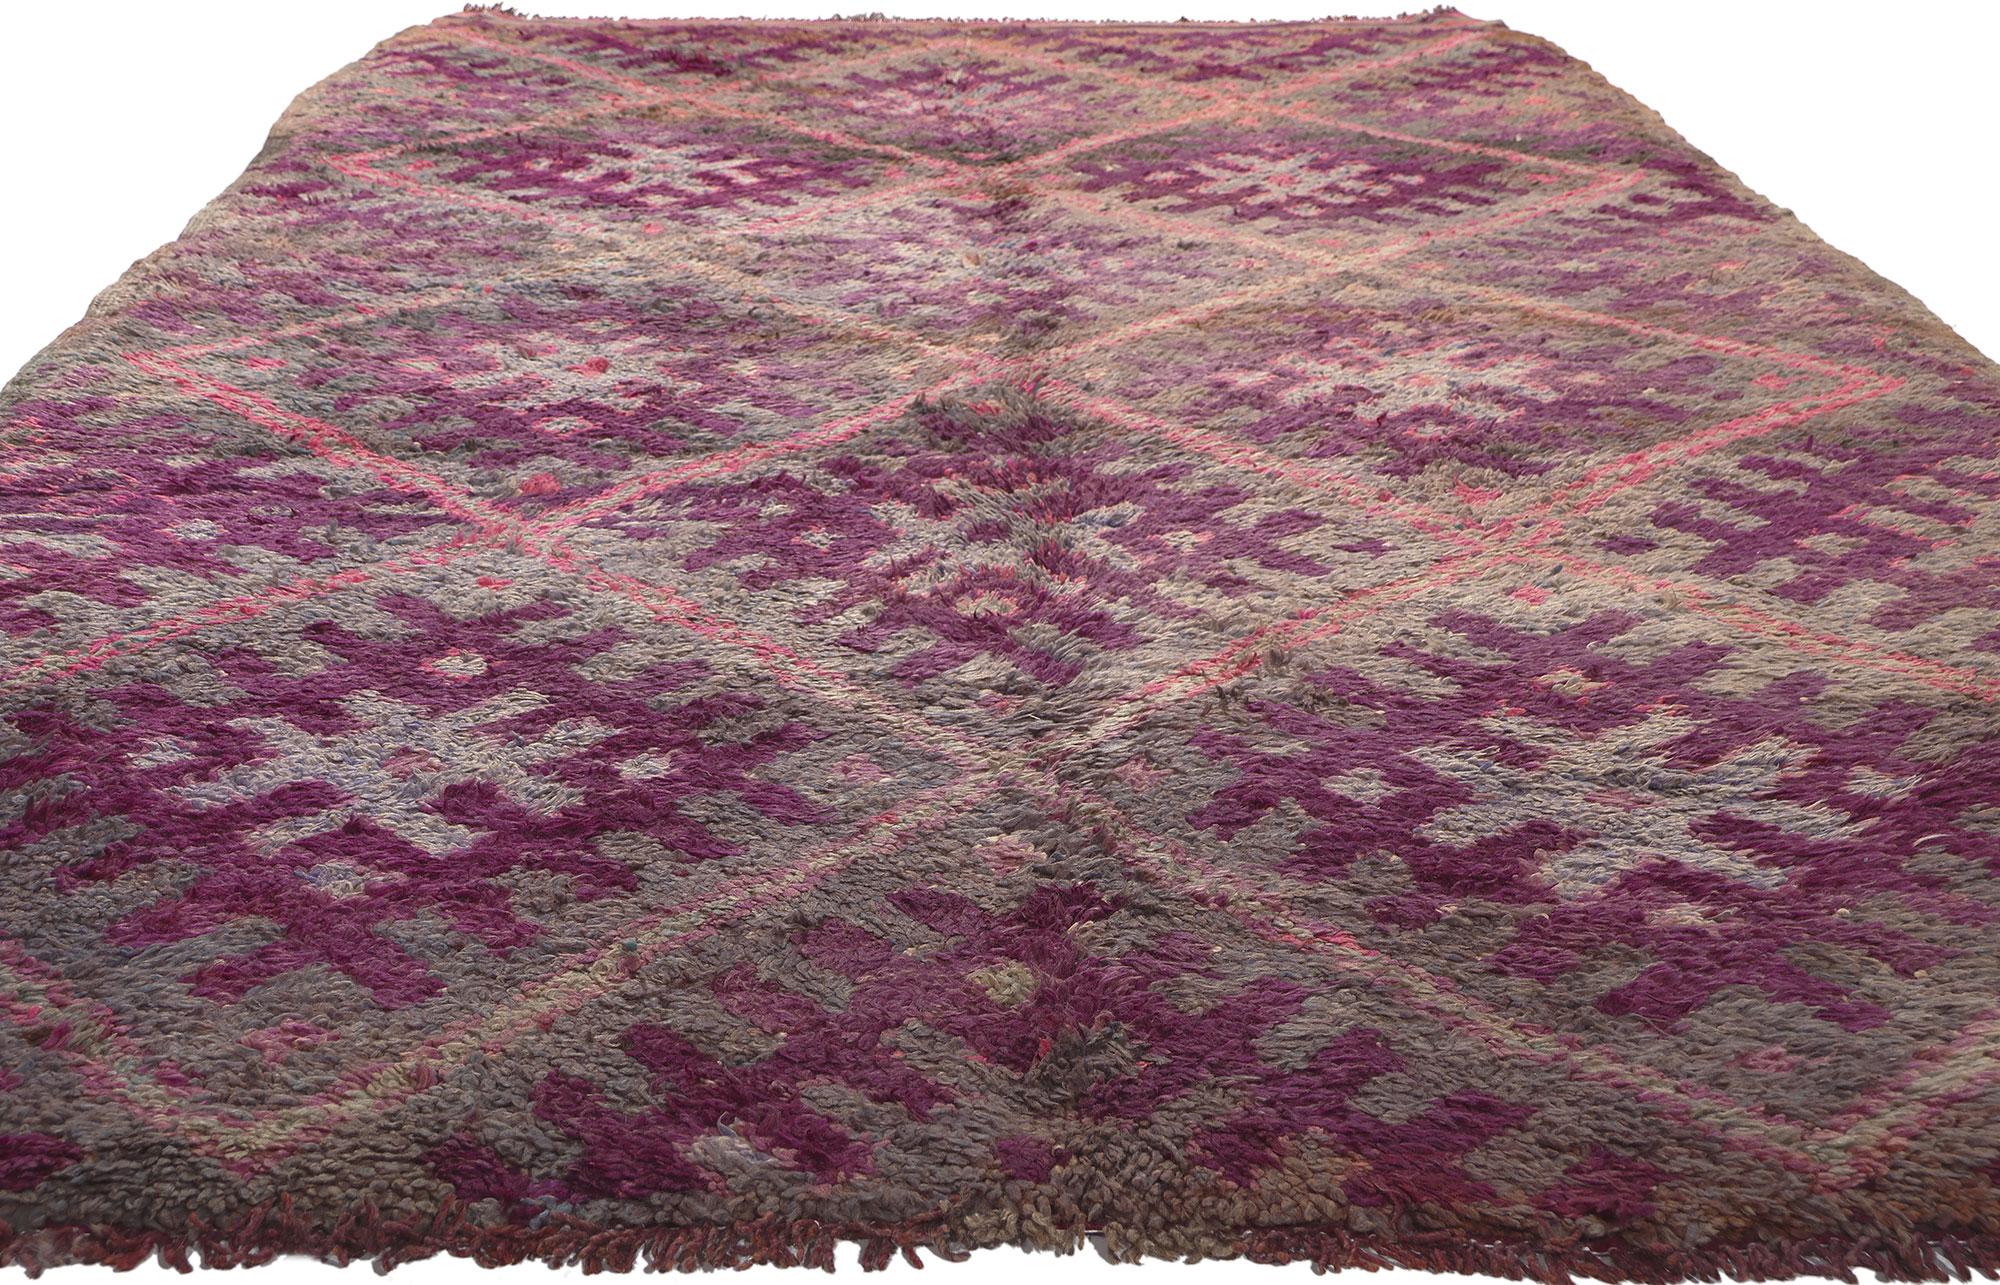 Hand-Knotted Vintage Purple Beni MGuild Moroccan Rug, Bohemian Rhapsody Meets Cozy Nomad For Sale